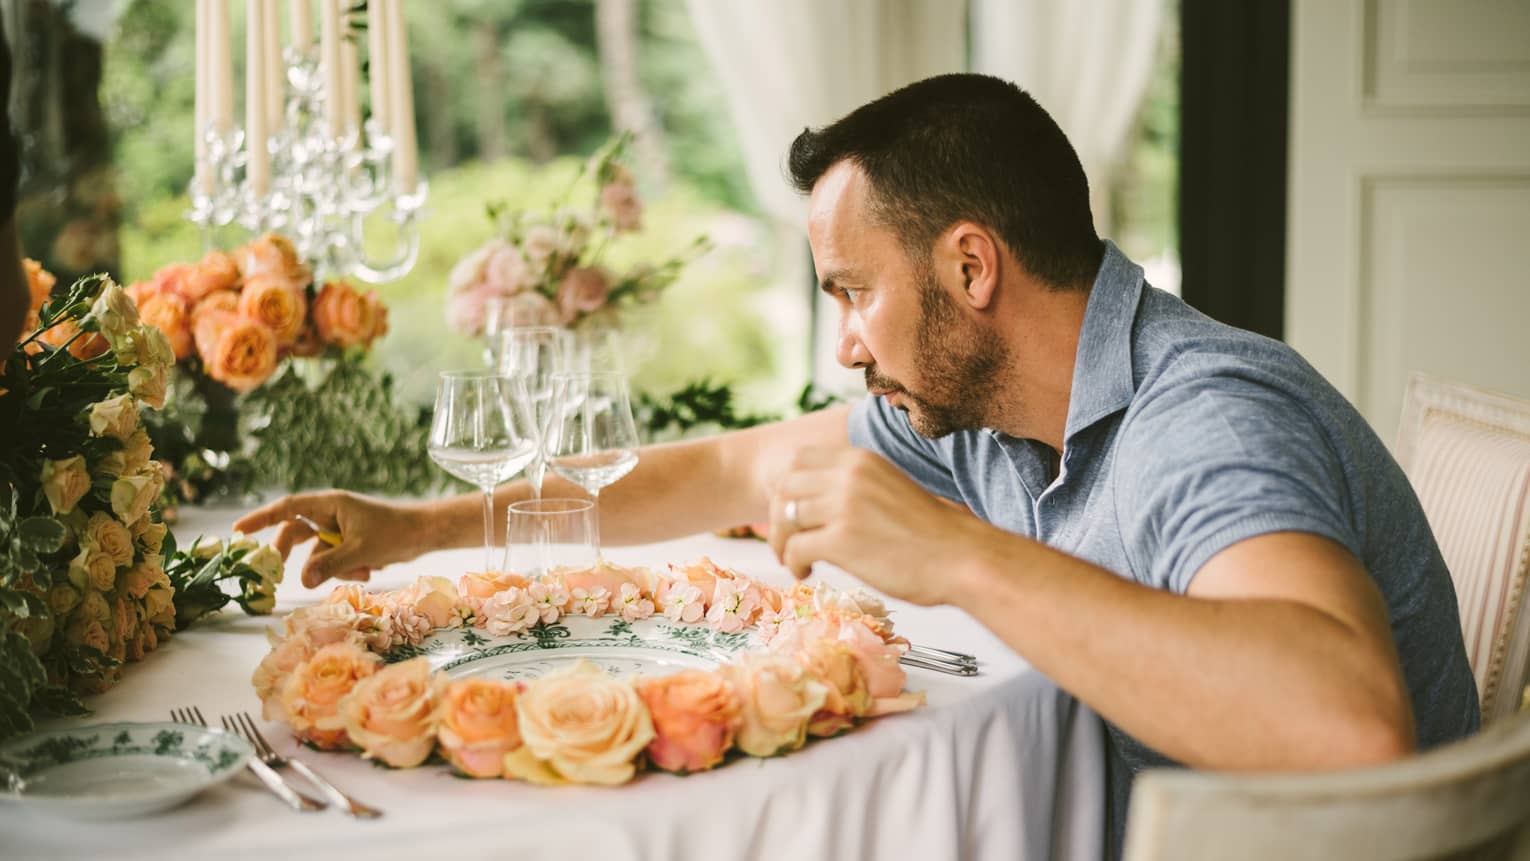 Artistic Director Vincenzo Dascanio carefully arranges roses on wedding dining table